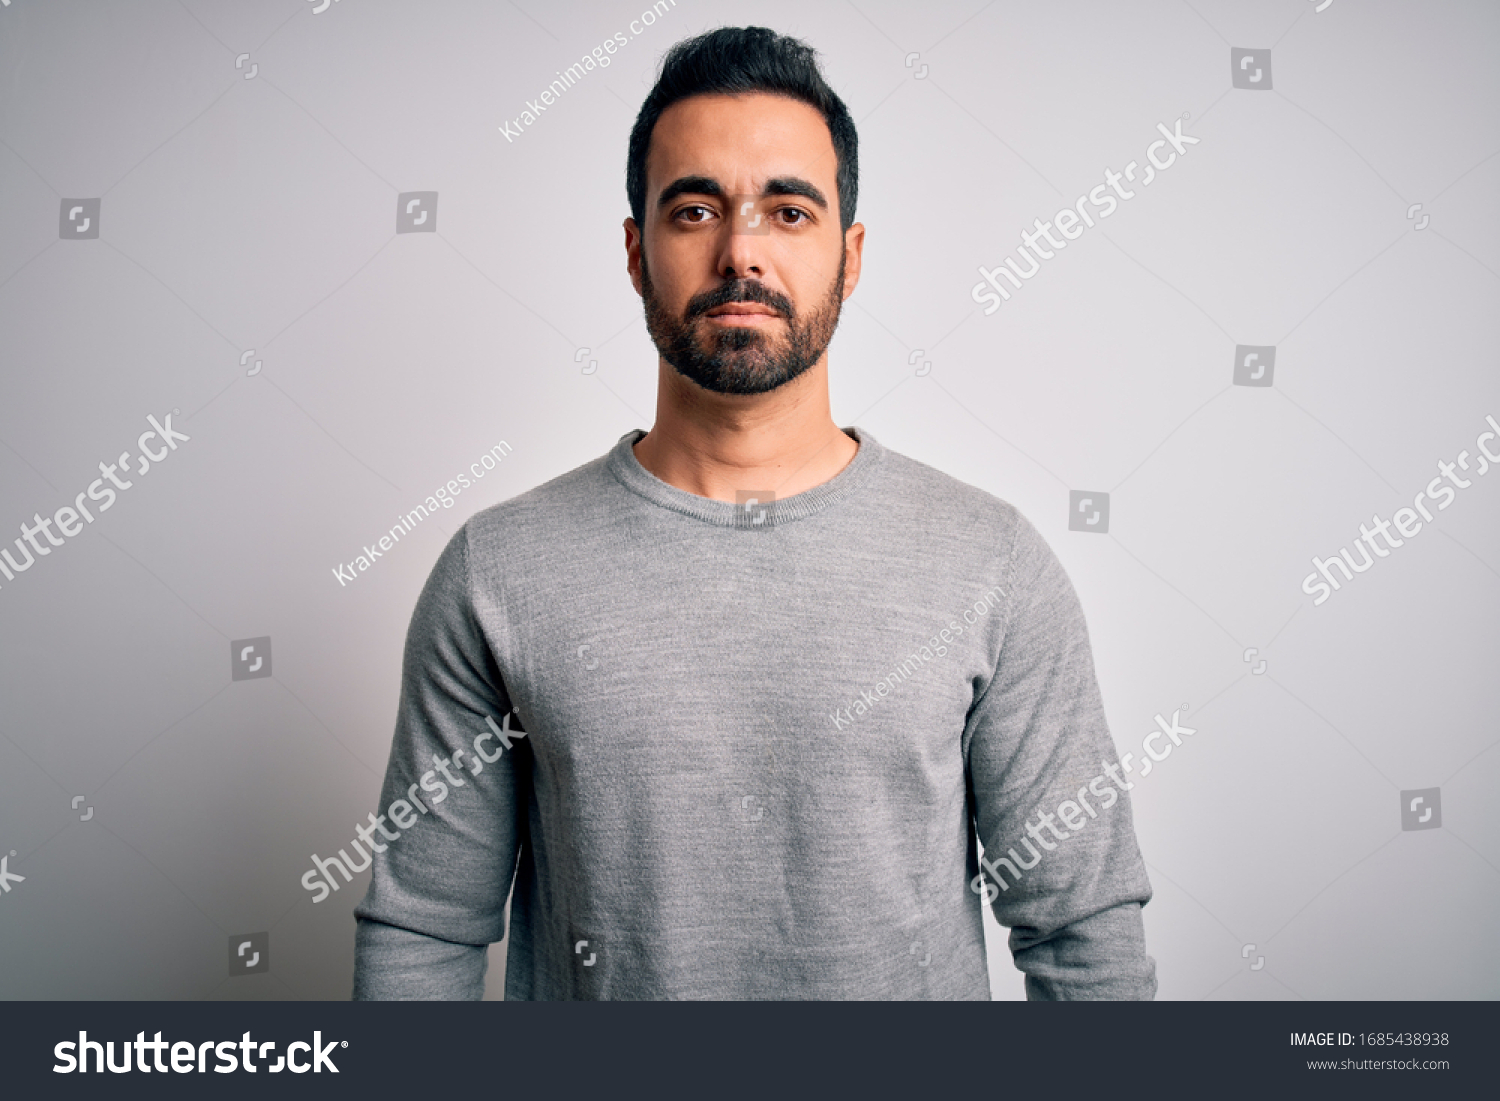 Young handsome man with beard wearing casual sweater standing over white background Relaxed with serious expression on face. Simple and natural looking at the camera. #1685438938